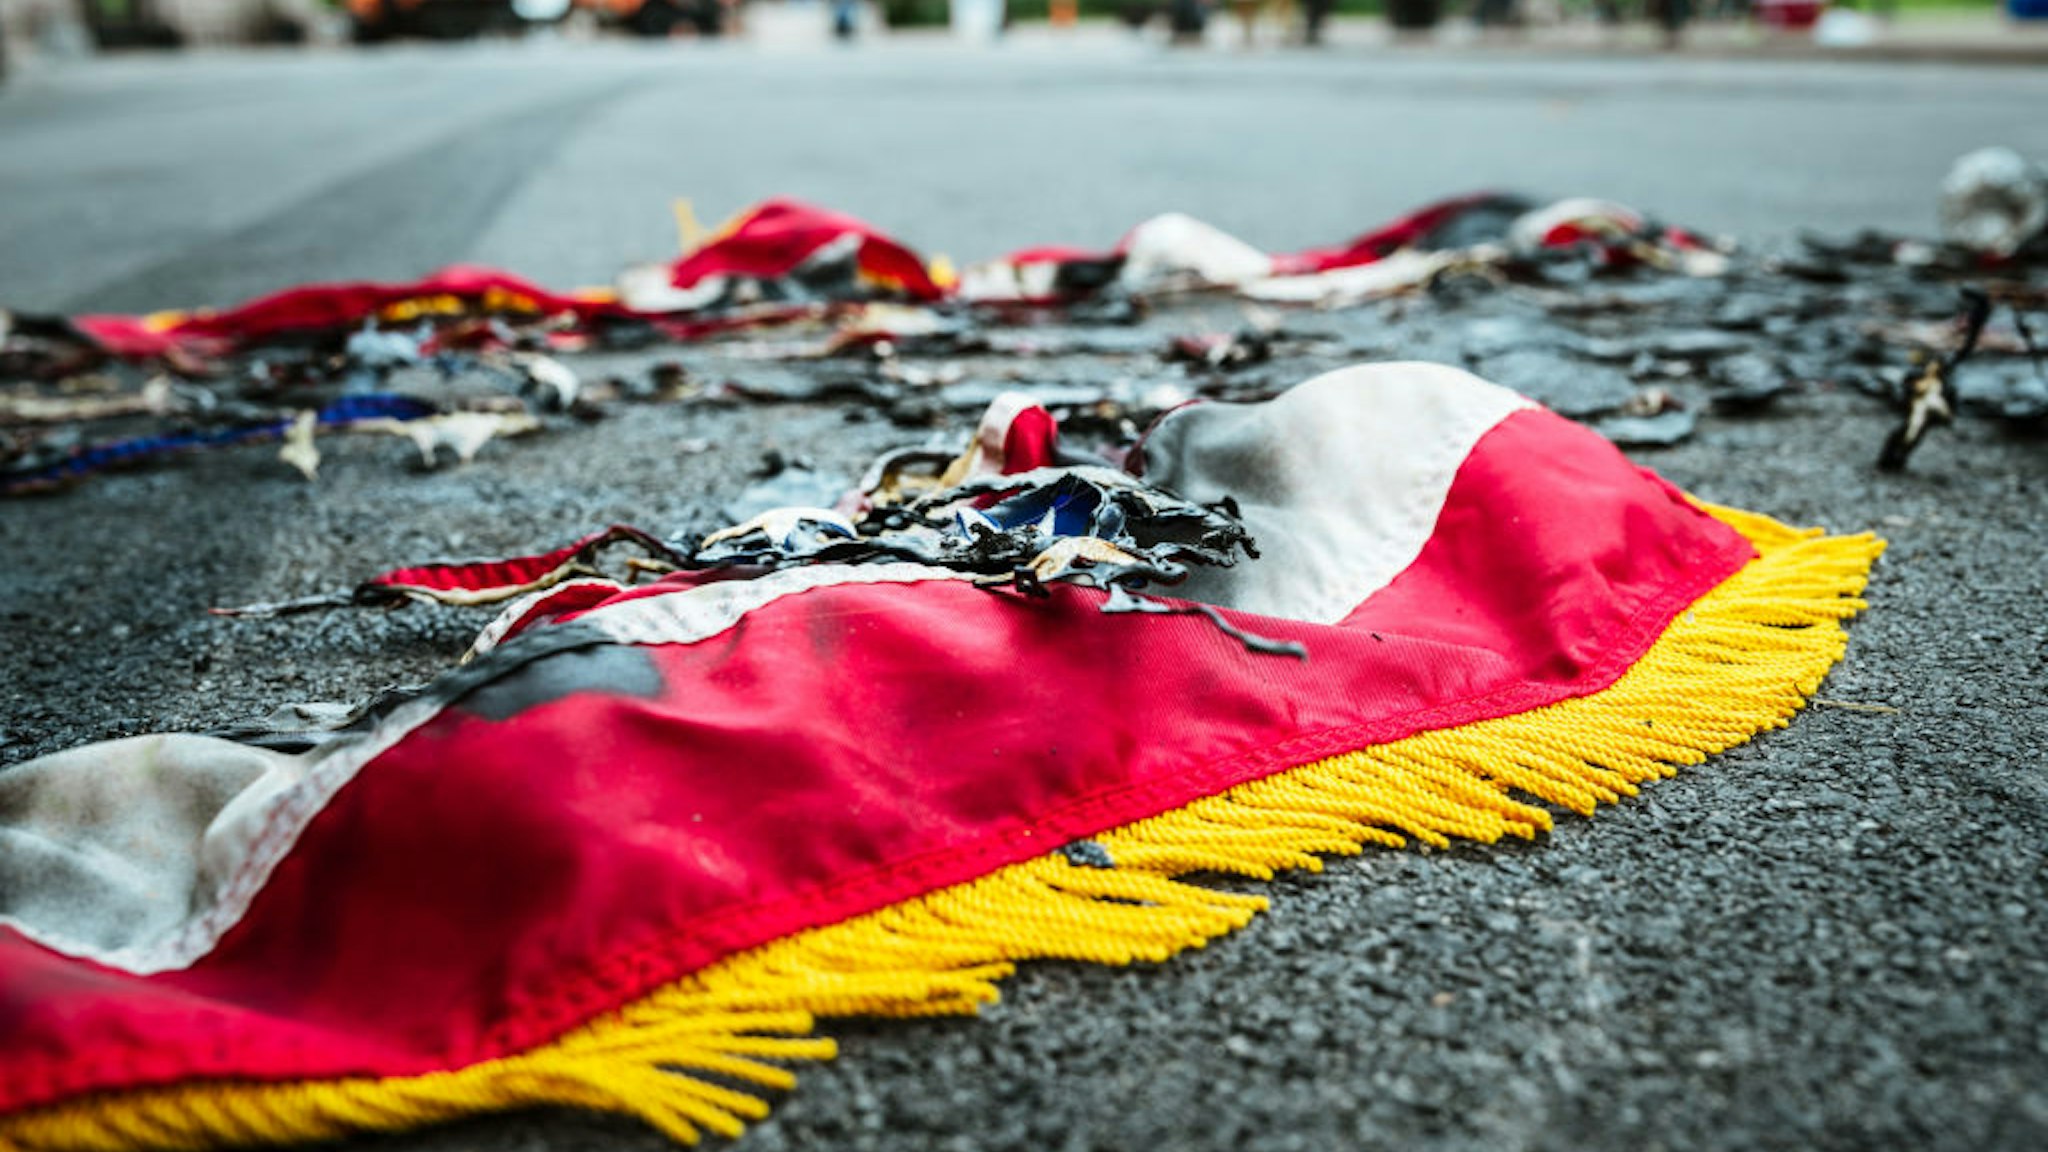 LOUISVILLE, KY - SEPTEMBER 22: The remnants of an American flag sit charred on the road near Jefferson Square Park on September 22, 2020 in Louisville, Kentucky. Jefferson Square Park has remained the epicenter for Louisville protest action following the March 13th killing of Breonna Taylor by police during a no-knock warrant at her apartment. (Photo by Jon Cherry/Getty Images)